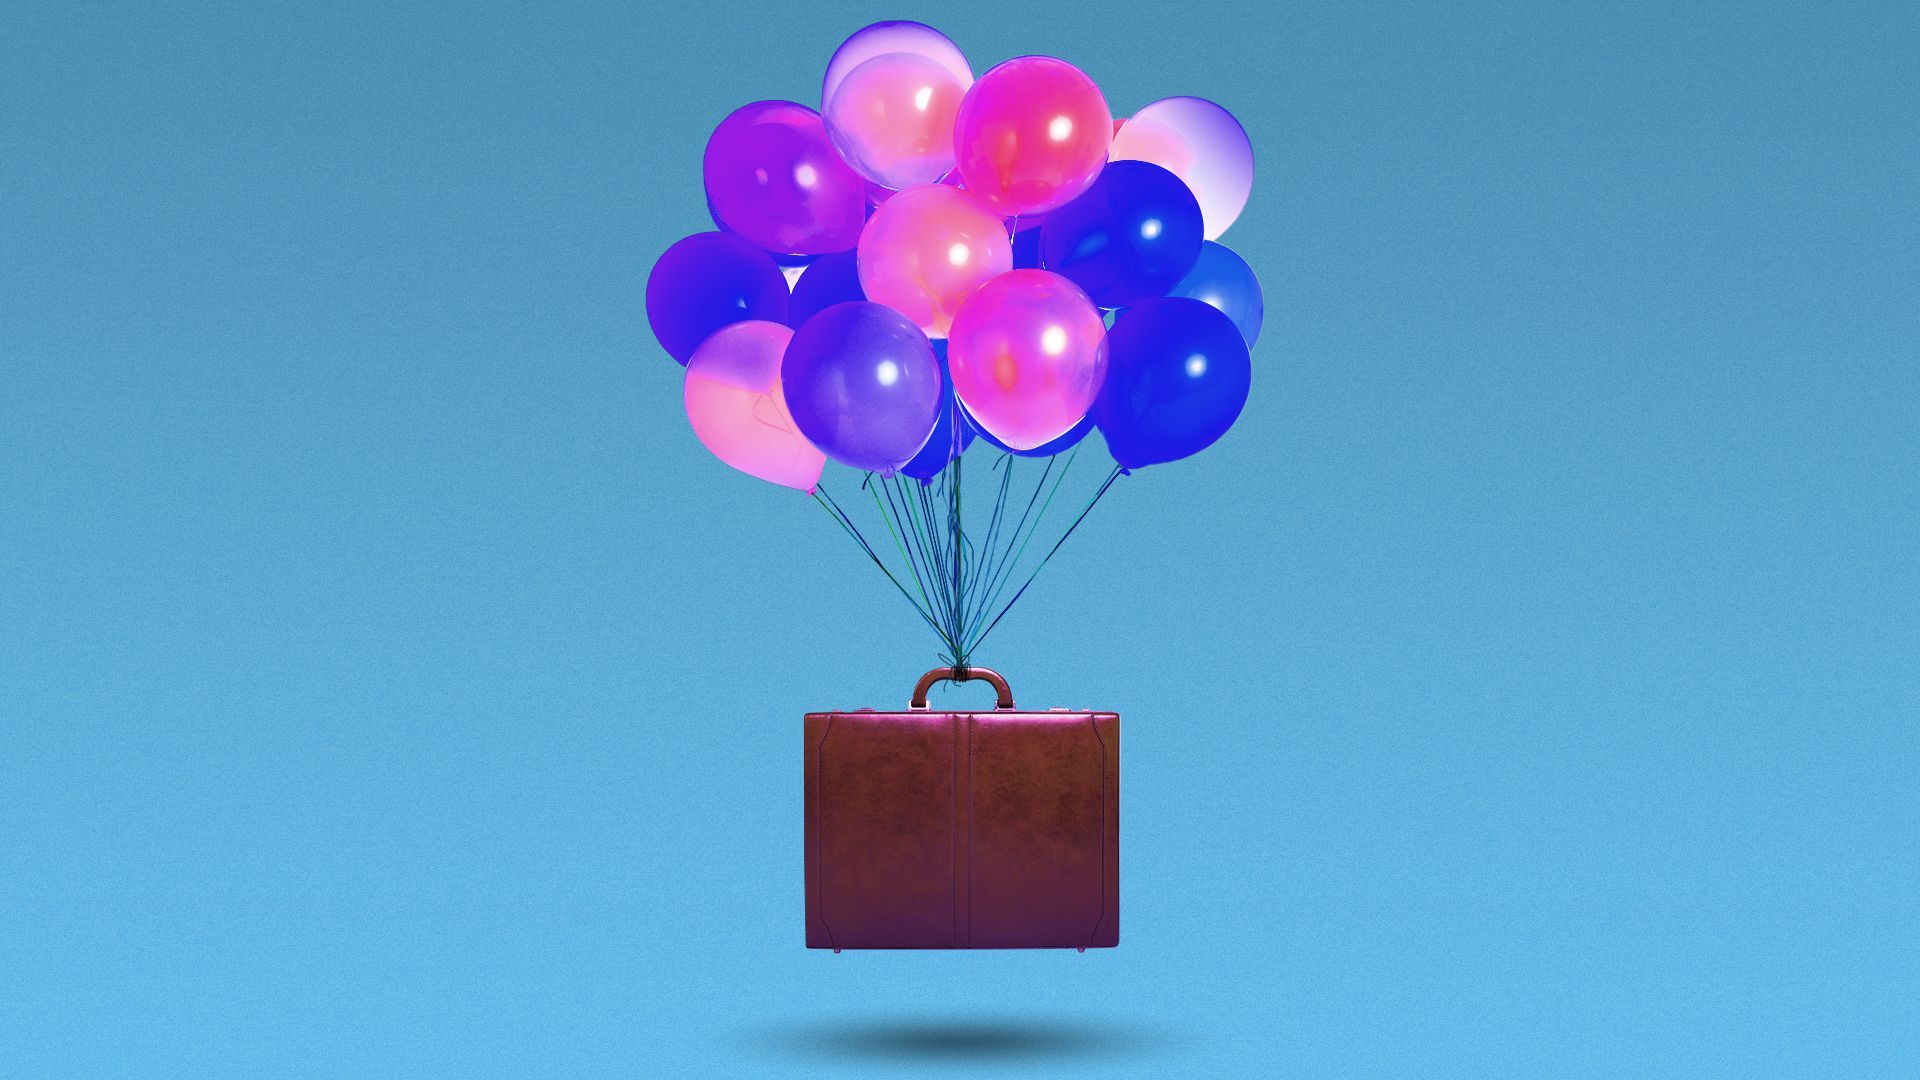 Illustration of a briefcase being lifted from the ground by balloons